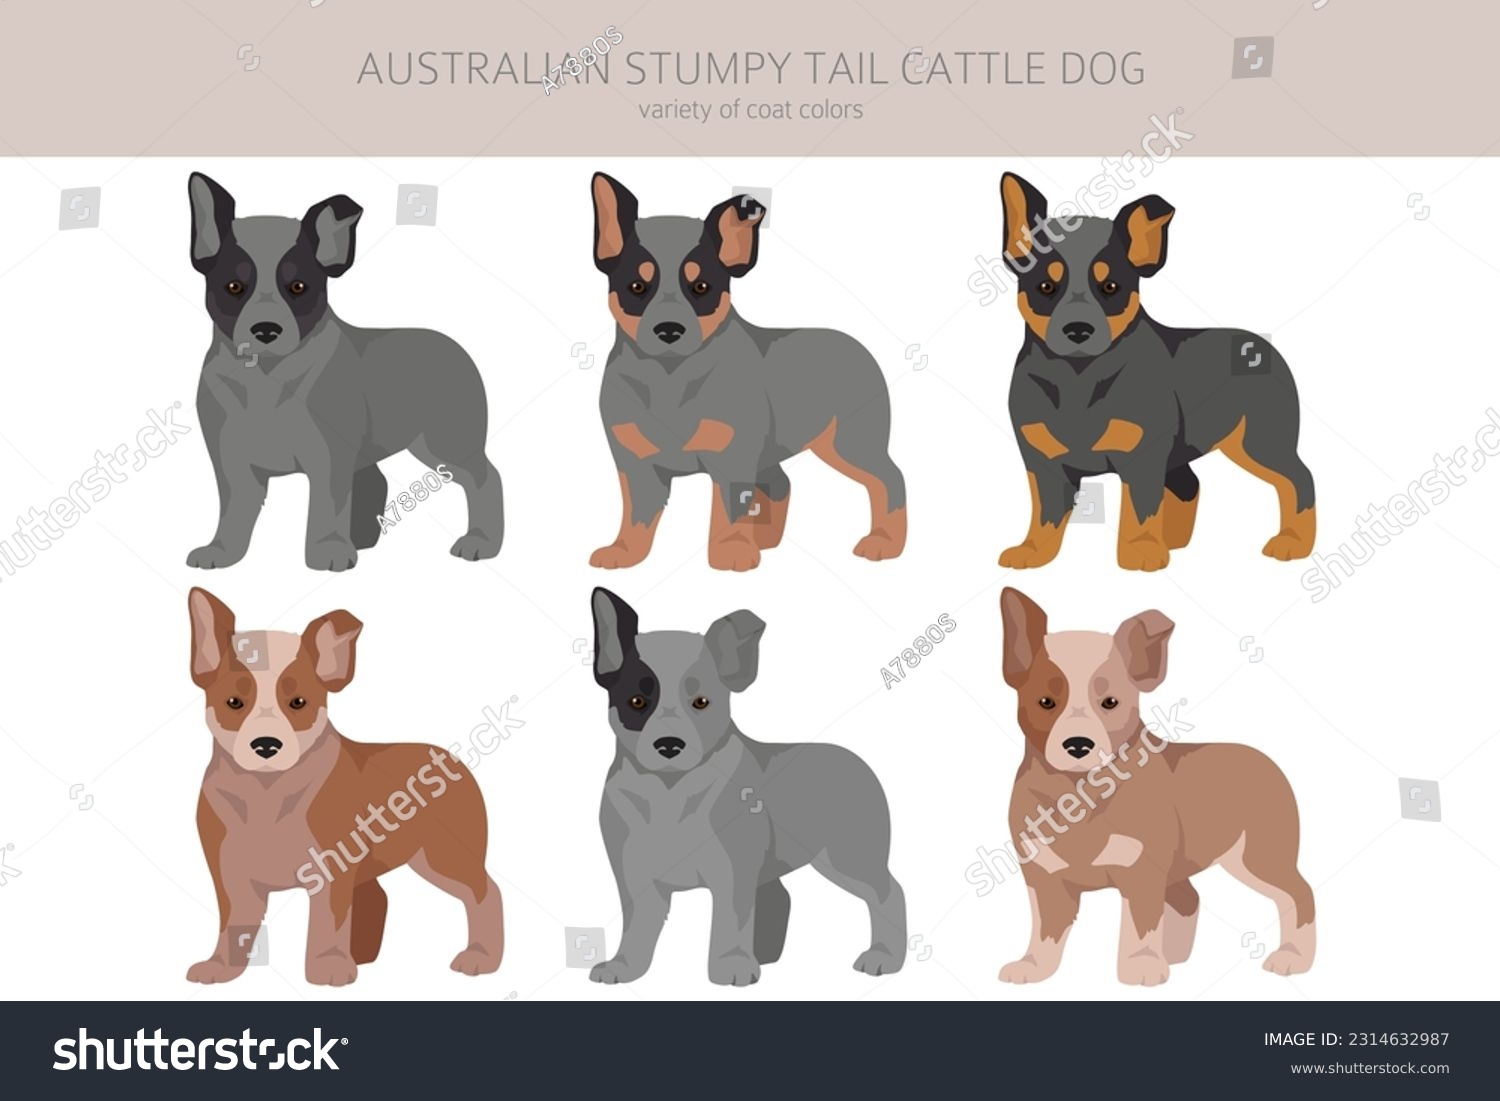 SVG of Australian stumpy tail cattle dog puppies all colours clipart. Different coat colors and poses set.  Vector illustration svg